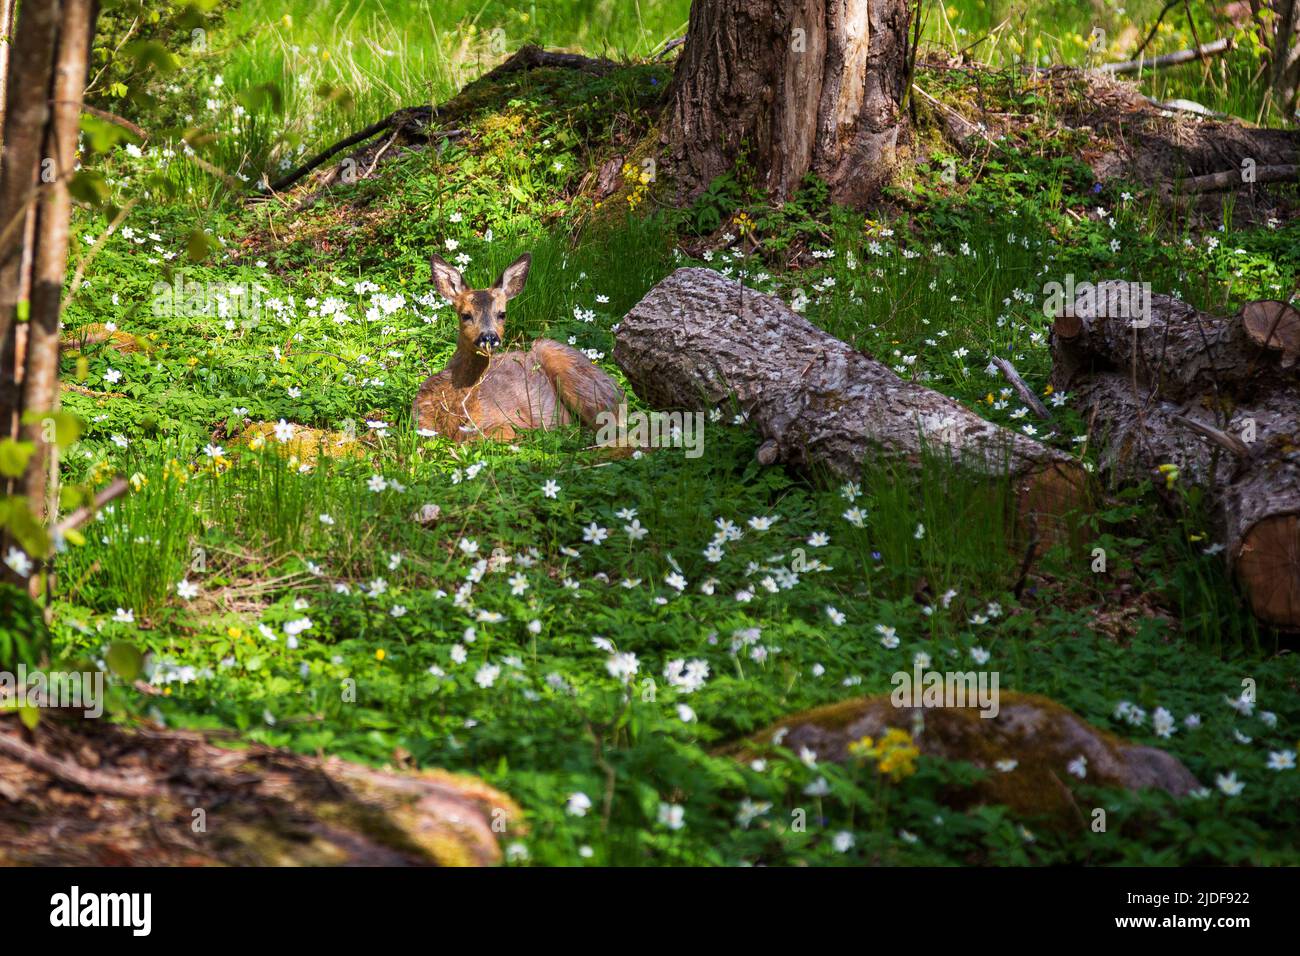 Young European roe deer lying amid white anemone flowers in a lush forest at Nåtö nature reserve in Åland Islands, Finland, on a sunny day in spring. Stock Photo